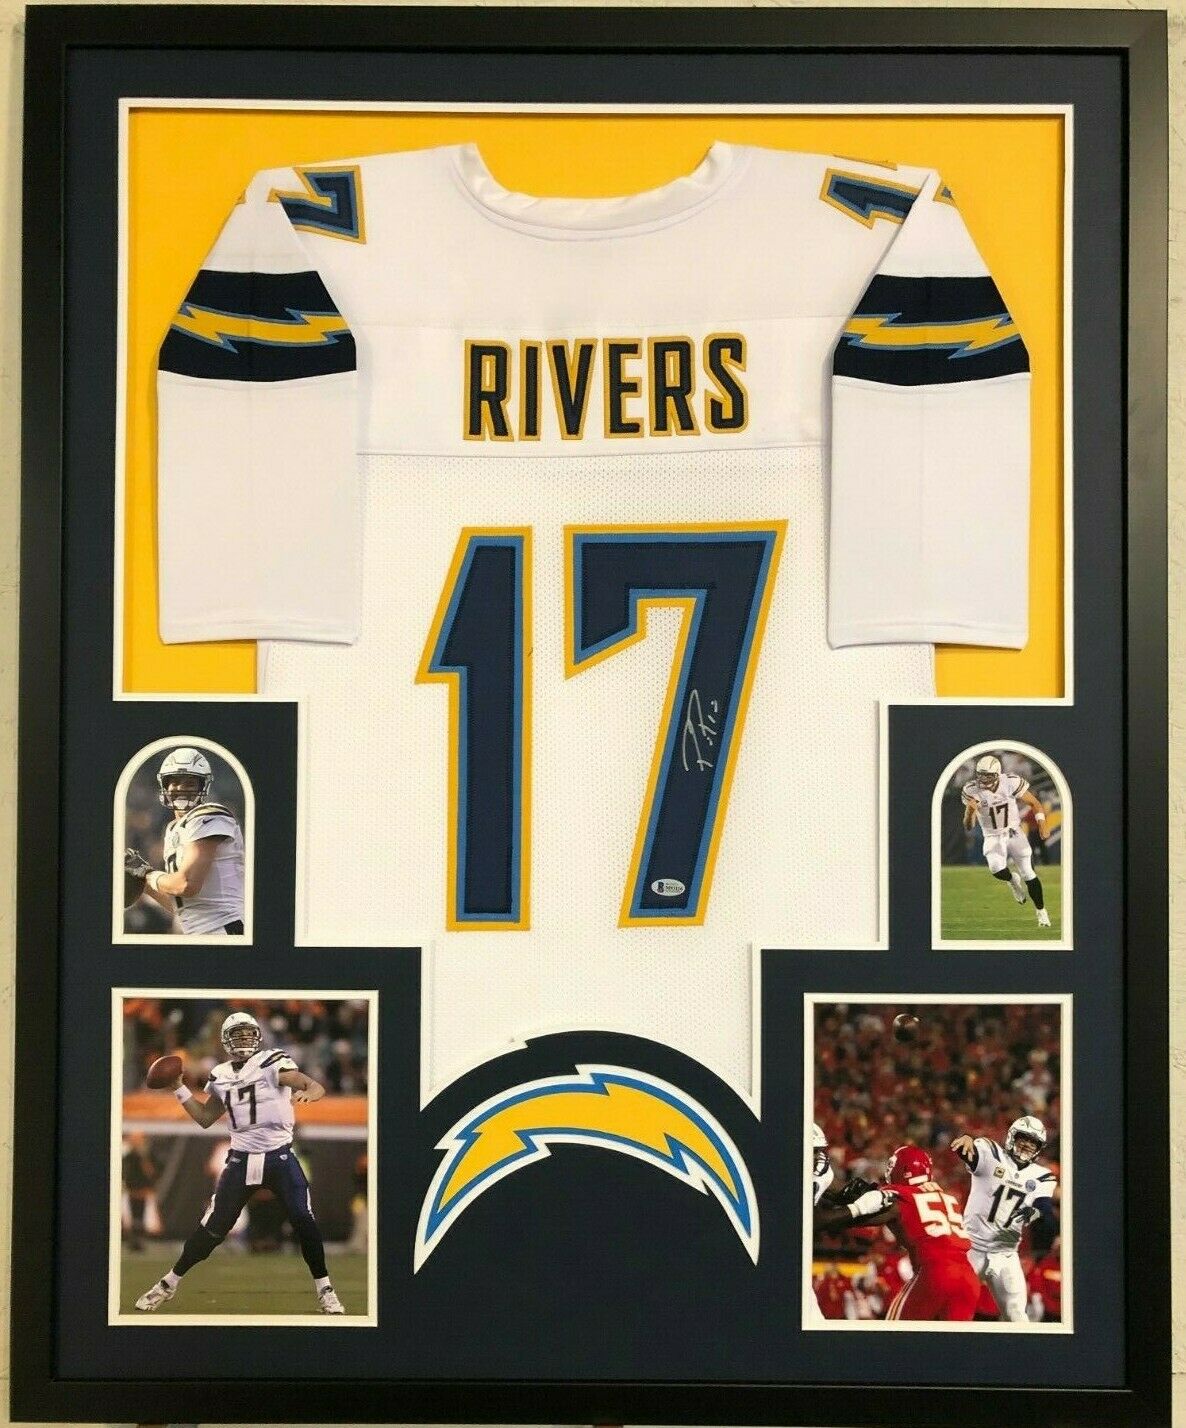 chargers jersey rivers